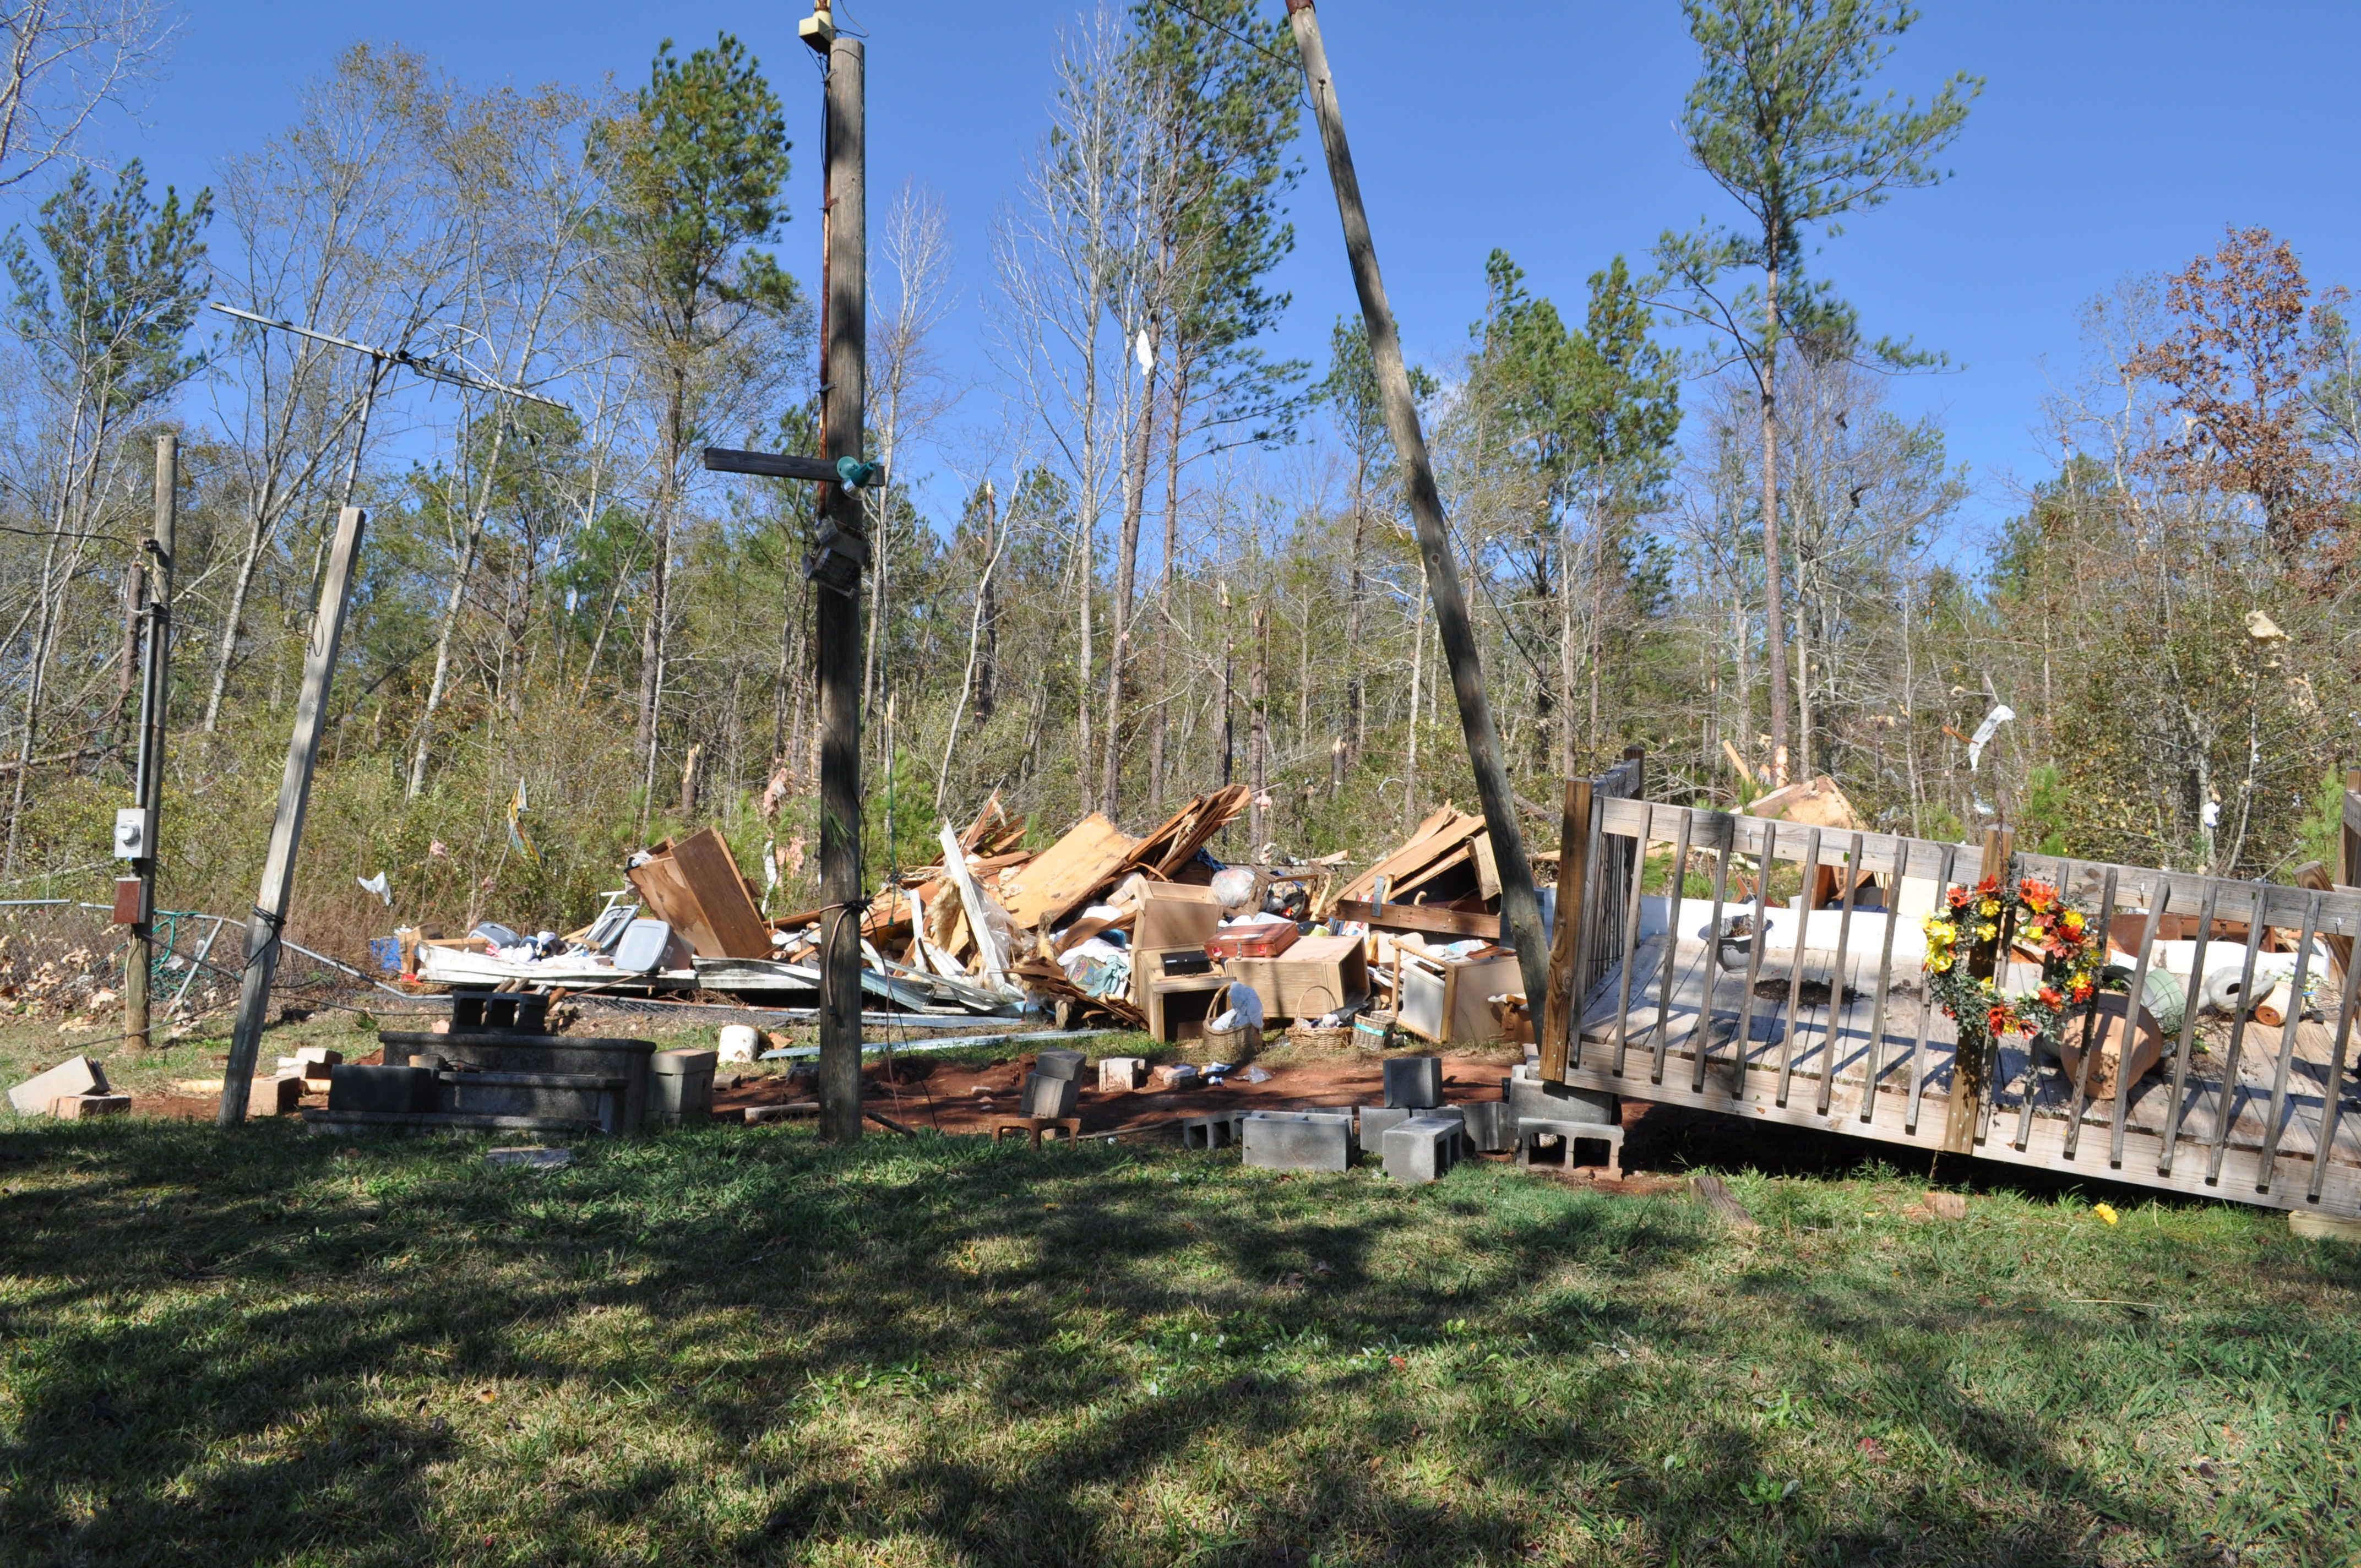 A mobile home that was destroyed by the EF2 tornado in Hamilton, Georgia.